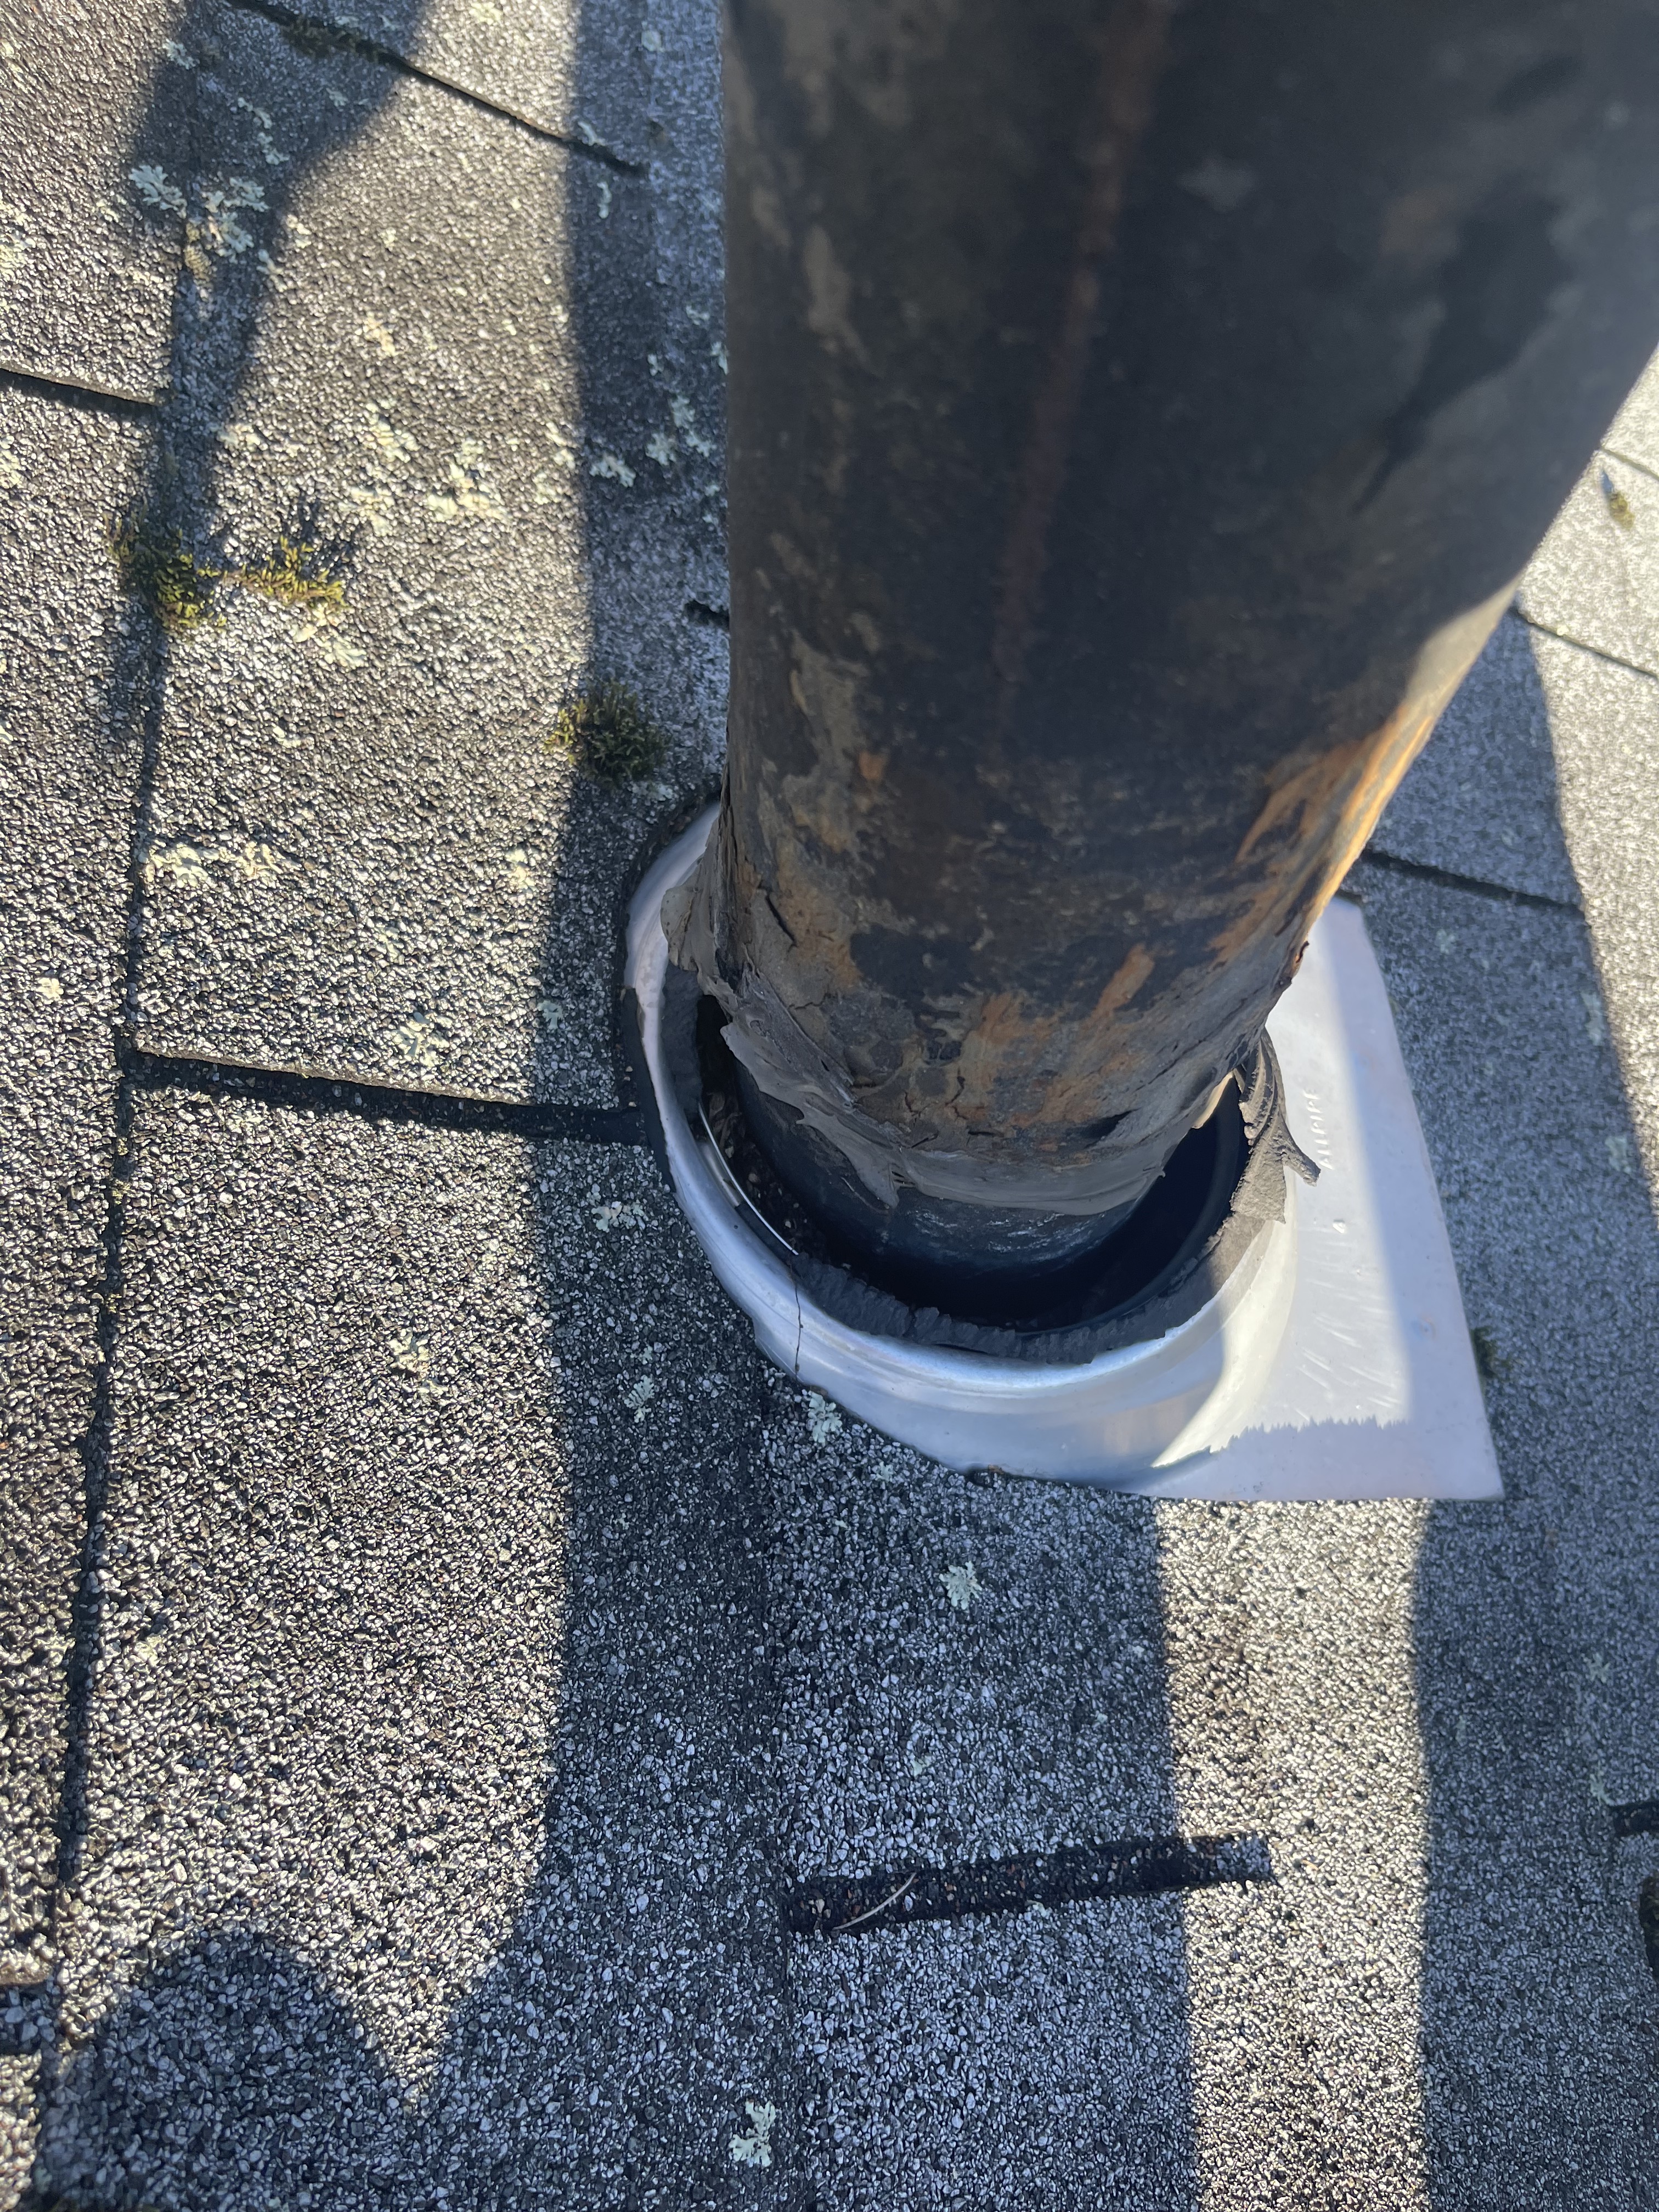 Torn roof pipe flashing